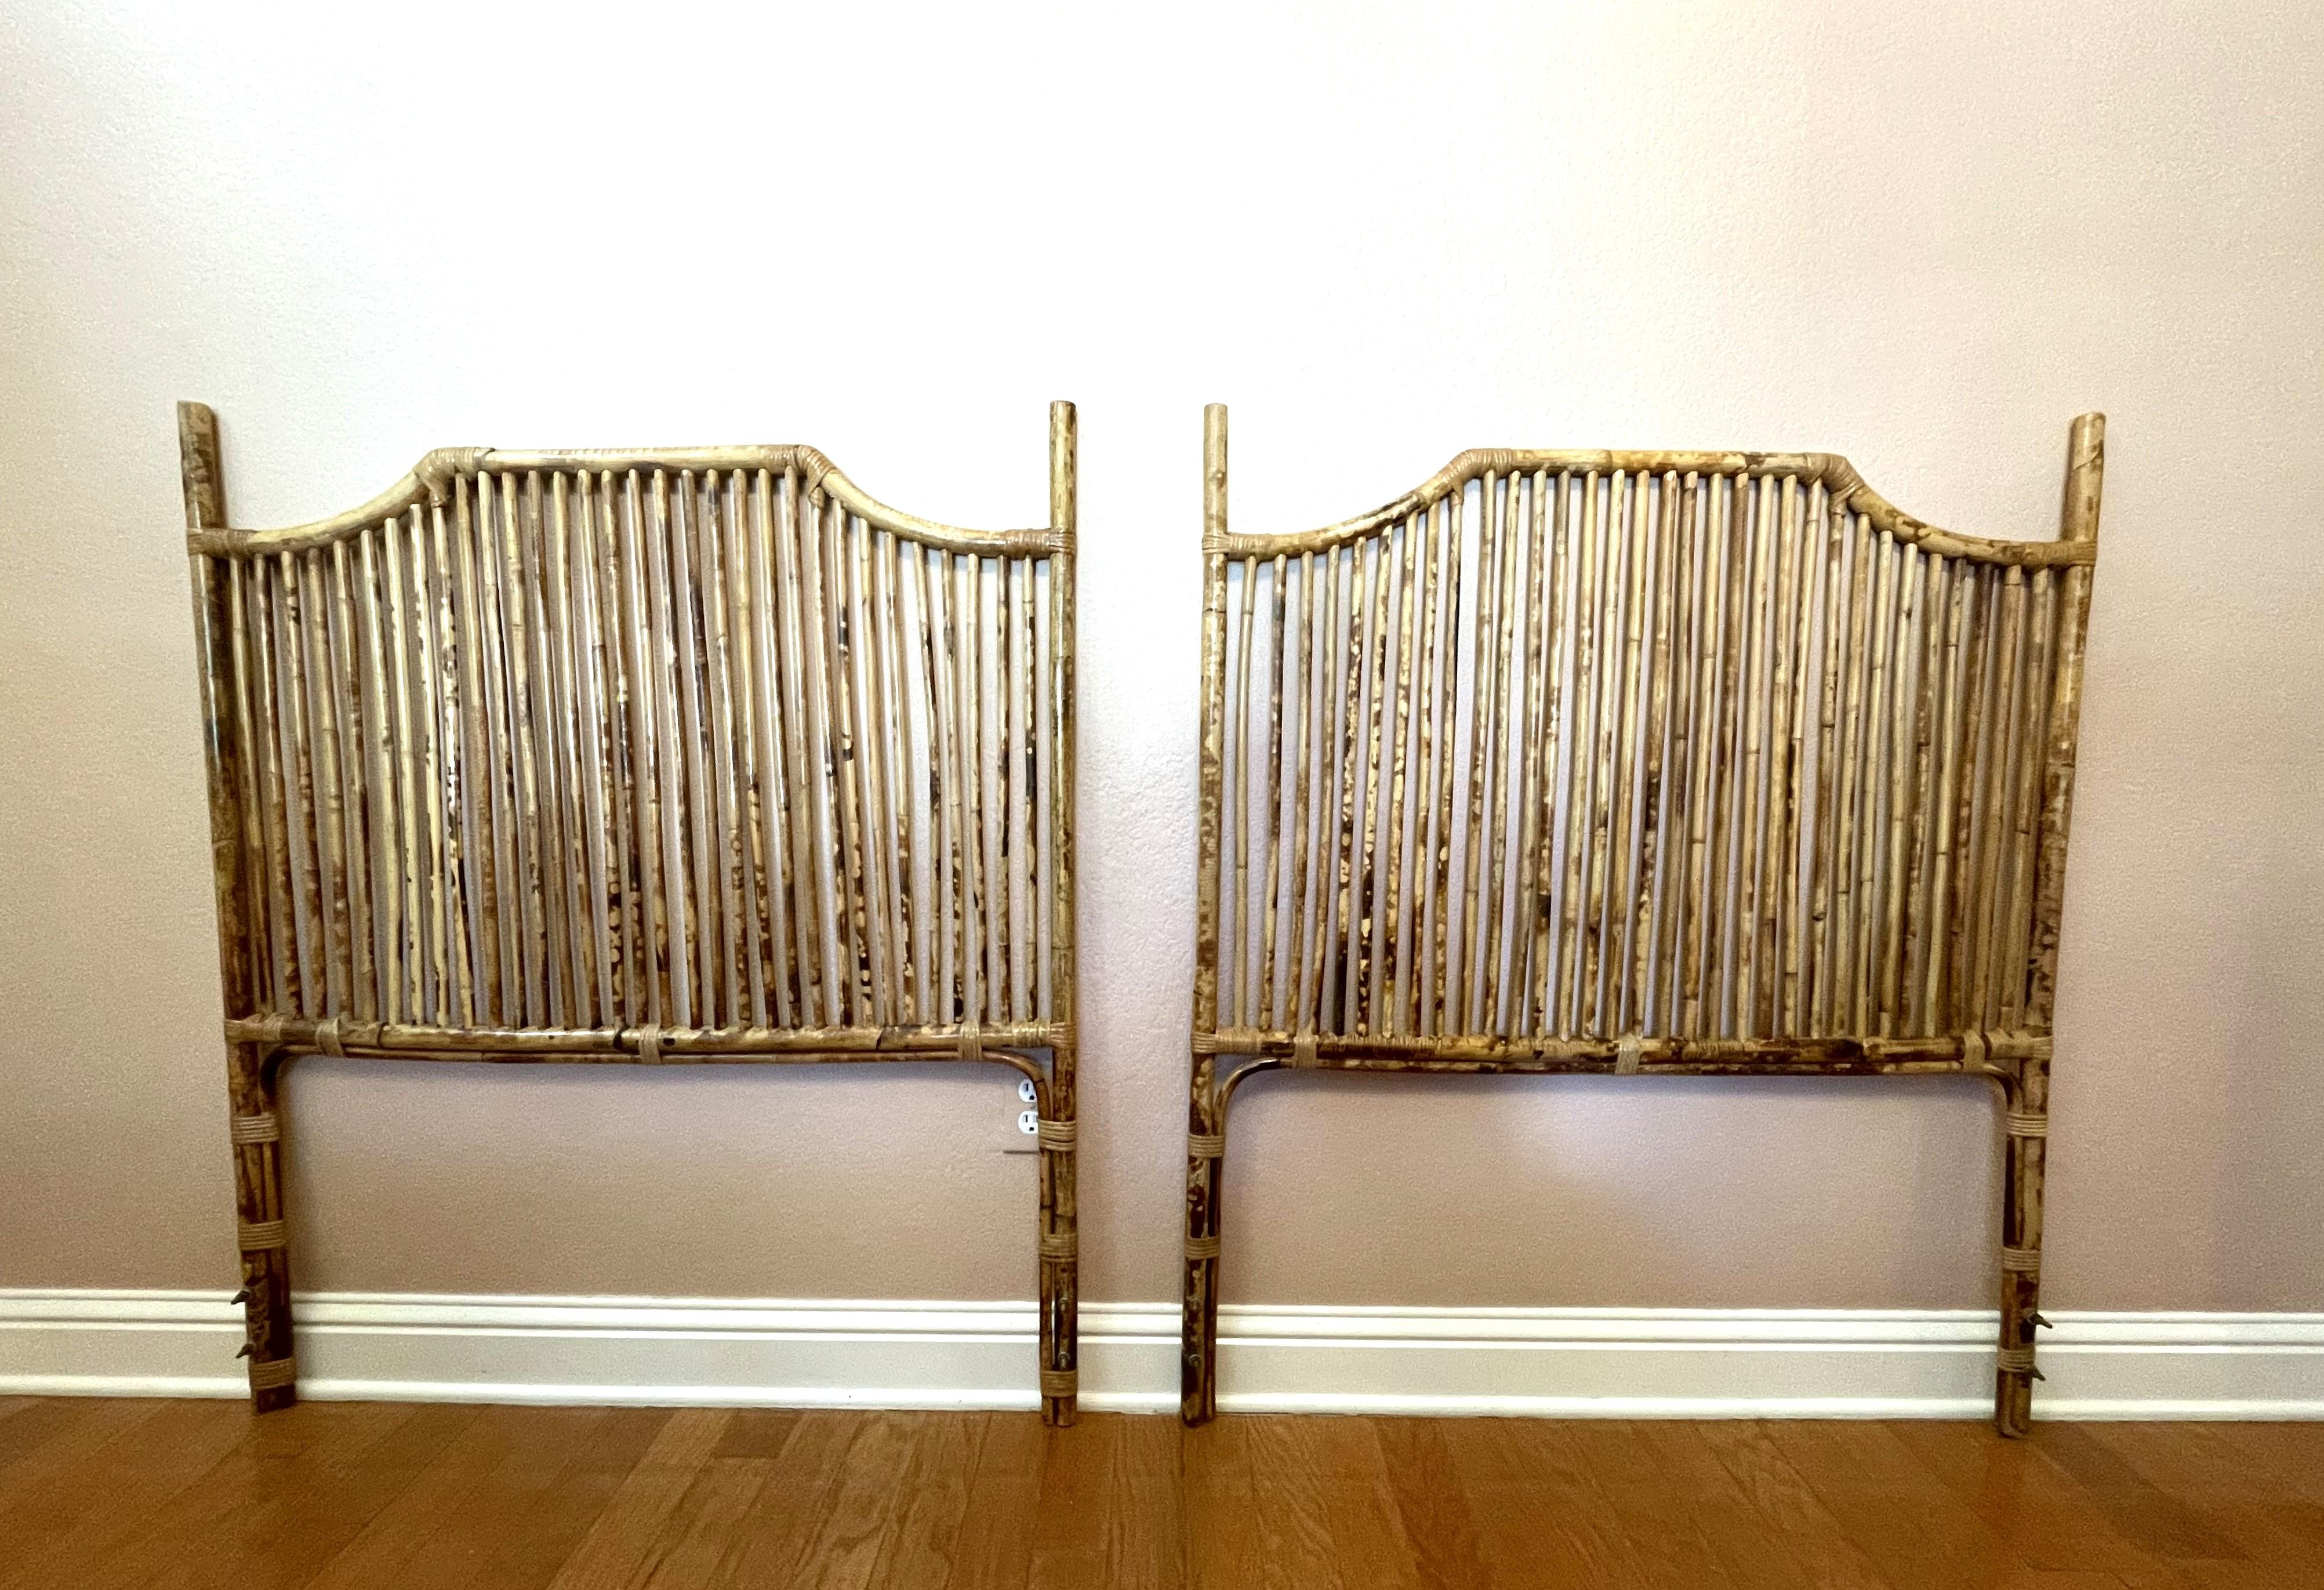 Mid-20th Century Tortoise-Bamboo and Rattan Headboards -- A Pair For Sale 3